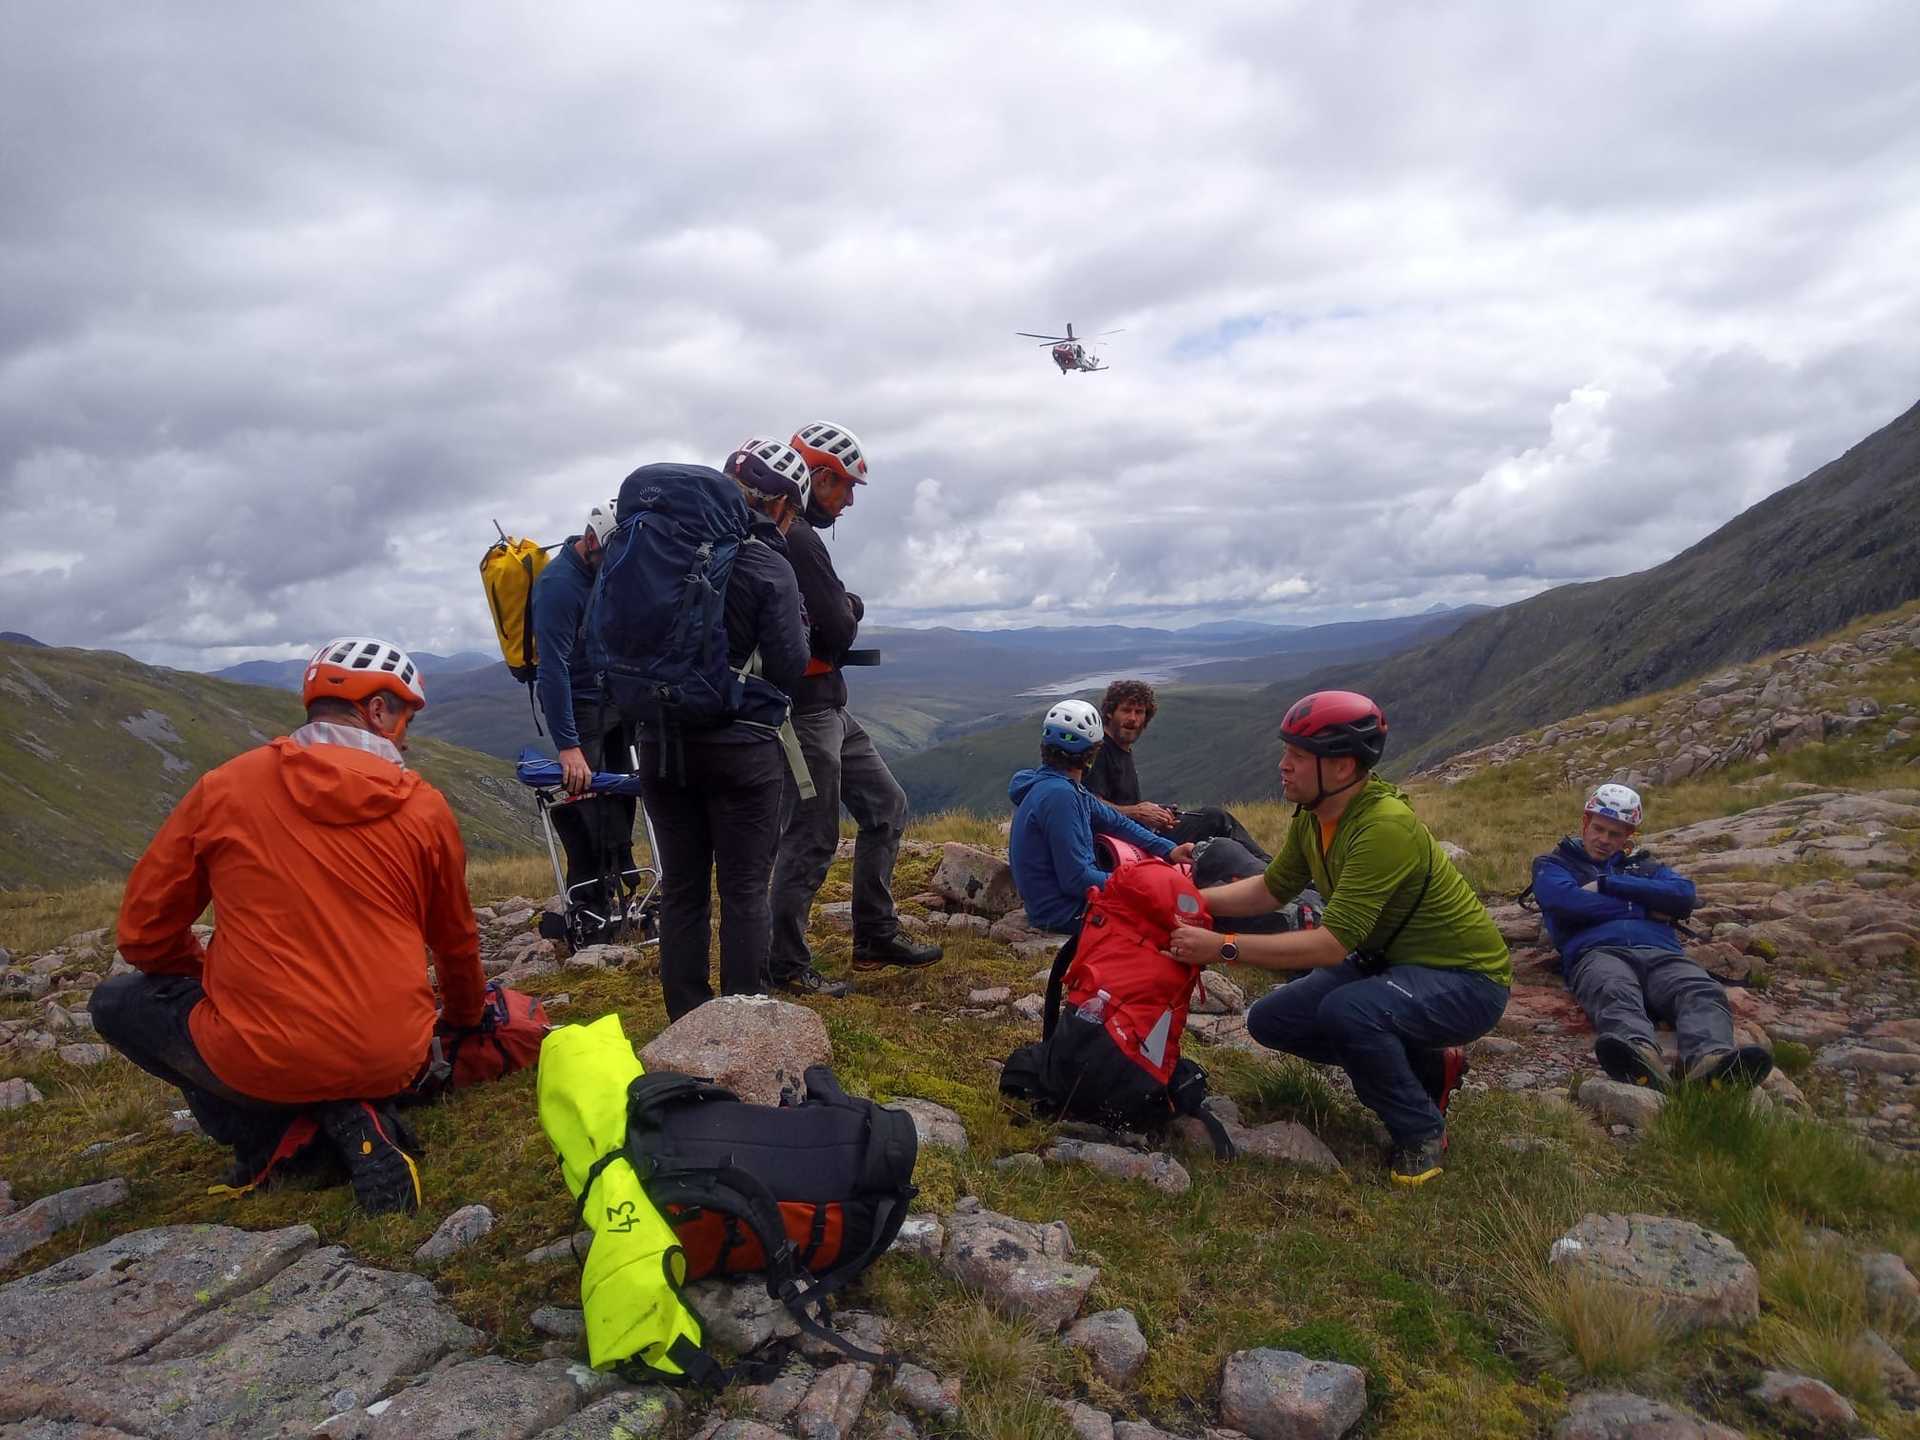 Glencoe MRT described this as a 'moment of quiet contemplation' while rescuers waited to be picked up by a helicopter. 